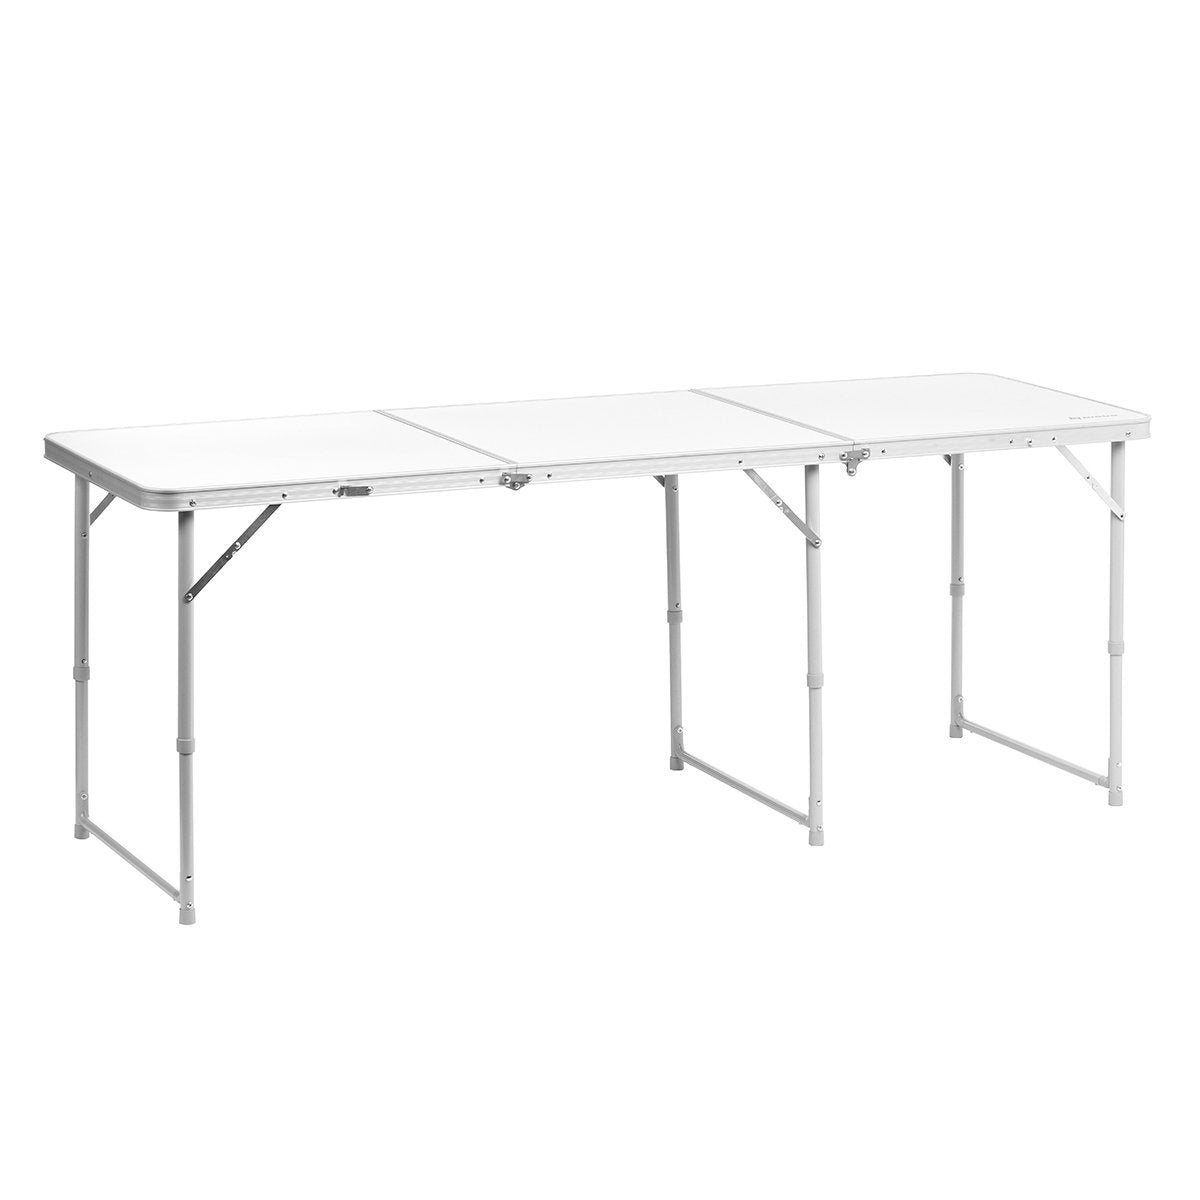 Large Three-Section Aluminum Folding Camping Table